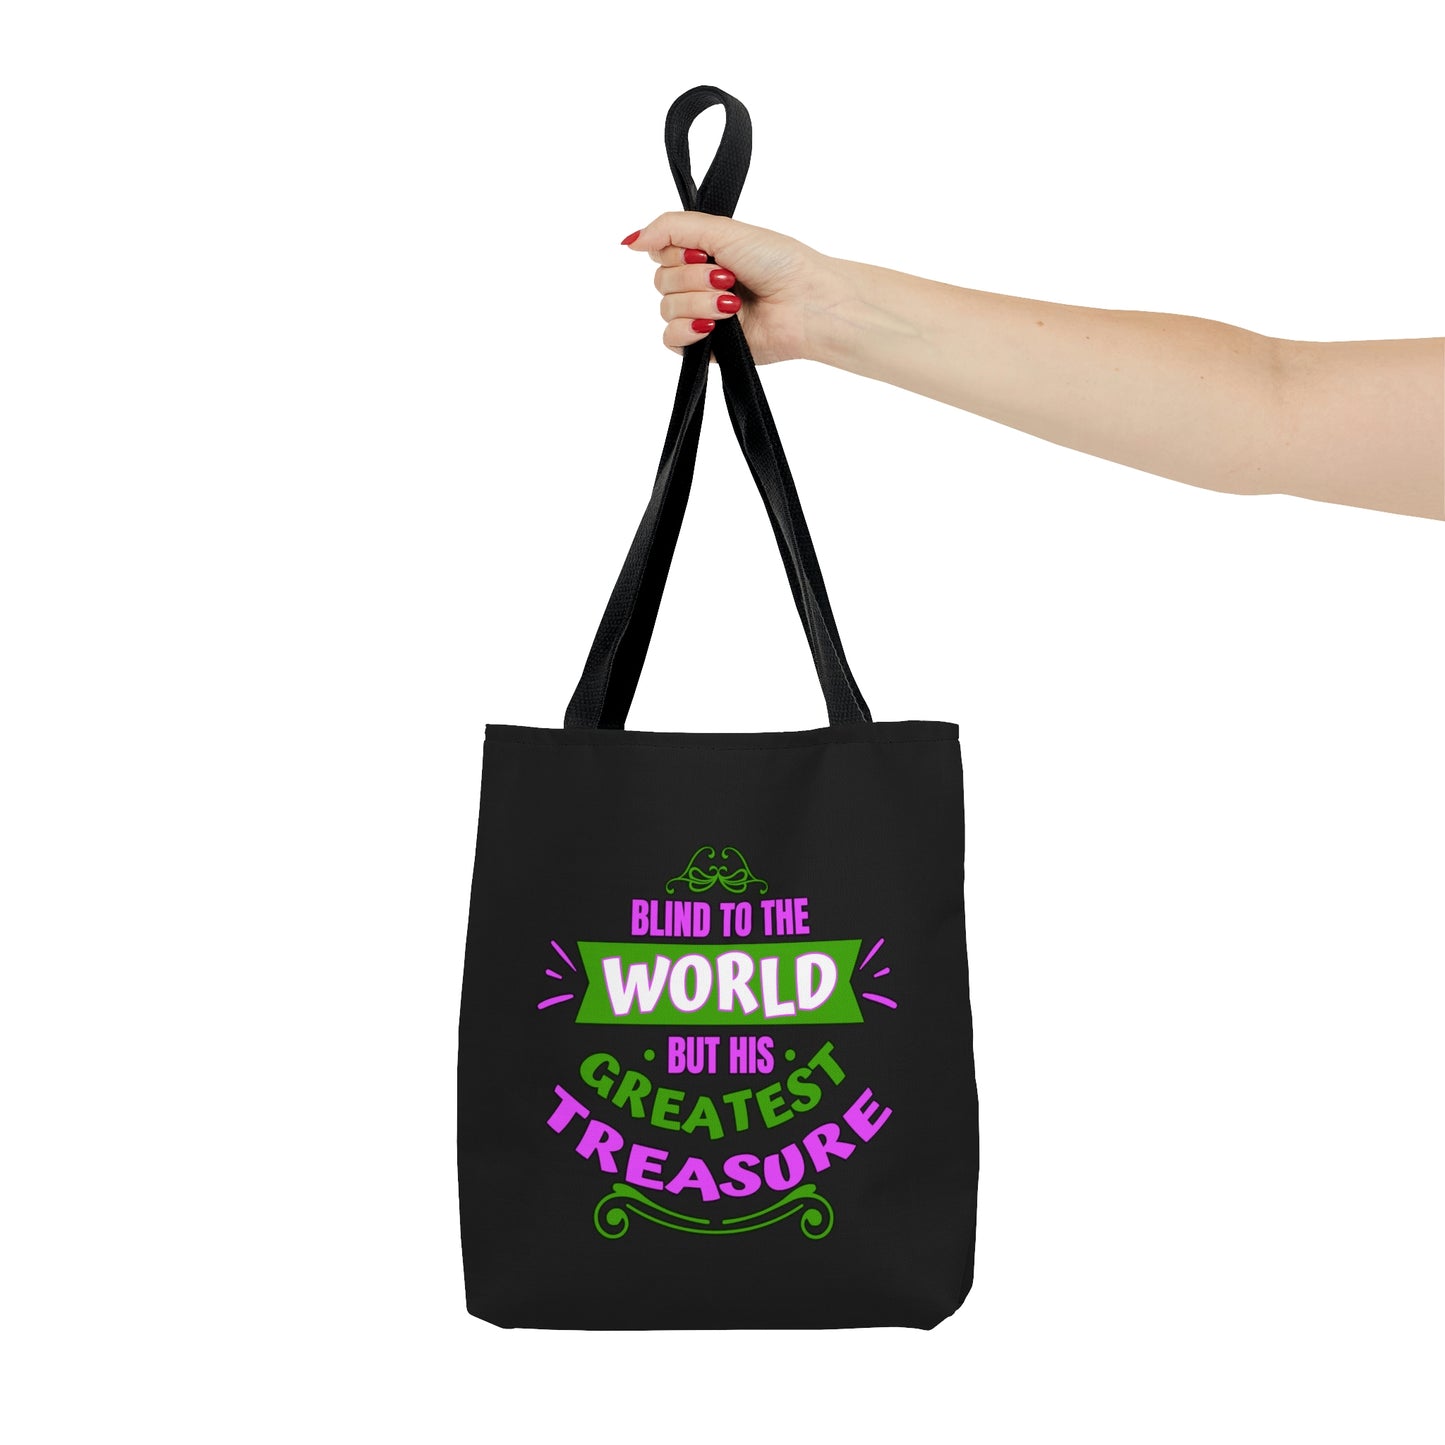 Blind To The World But His Greatest Treasure Tote Bag